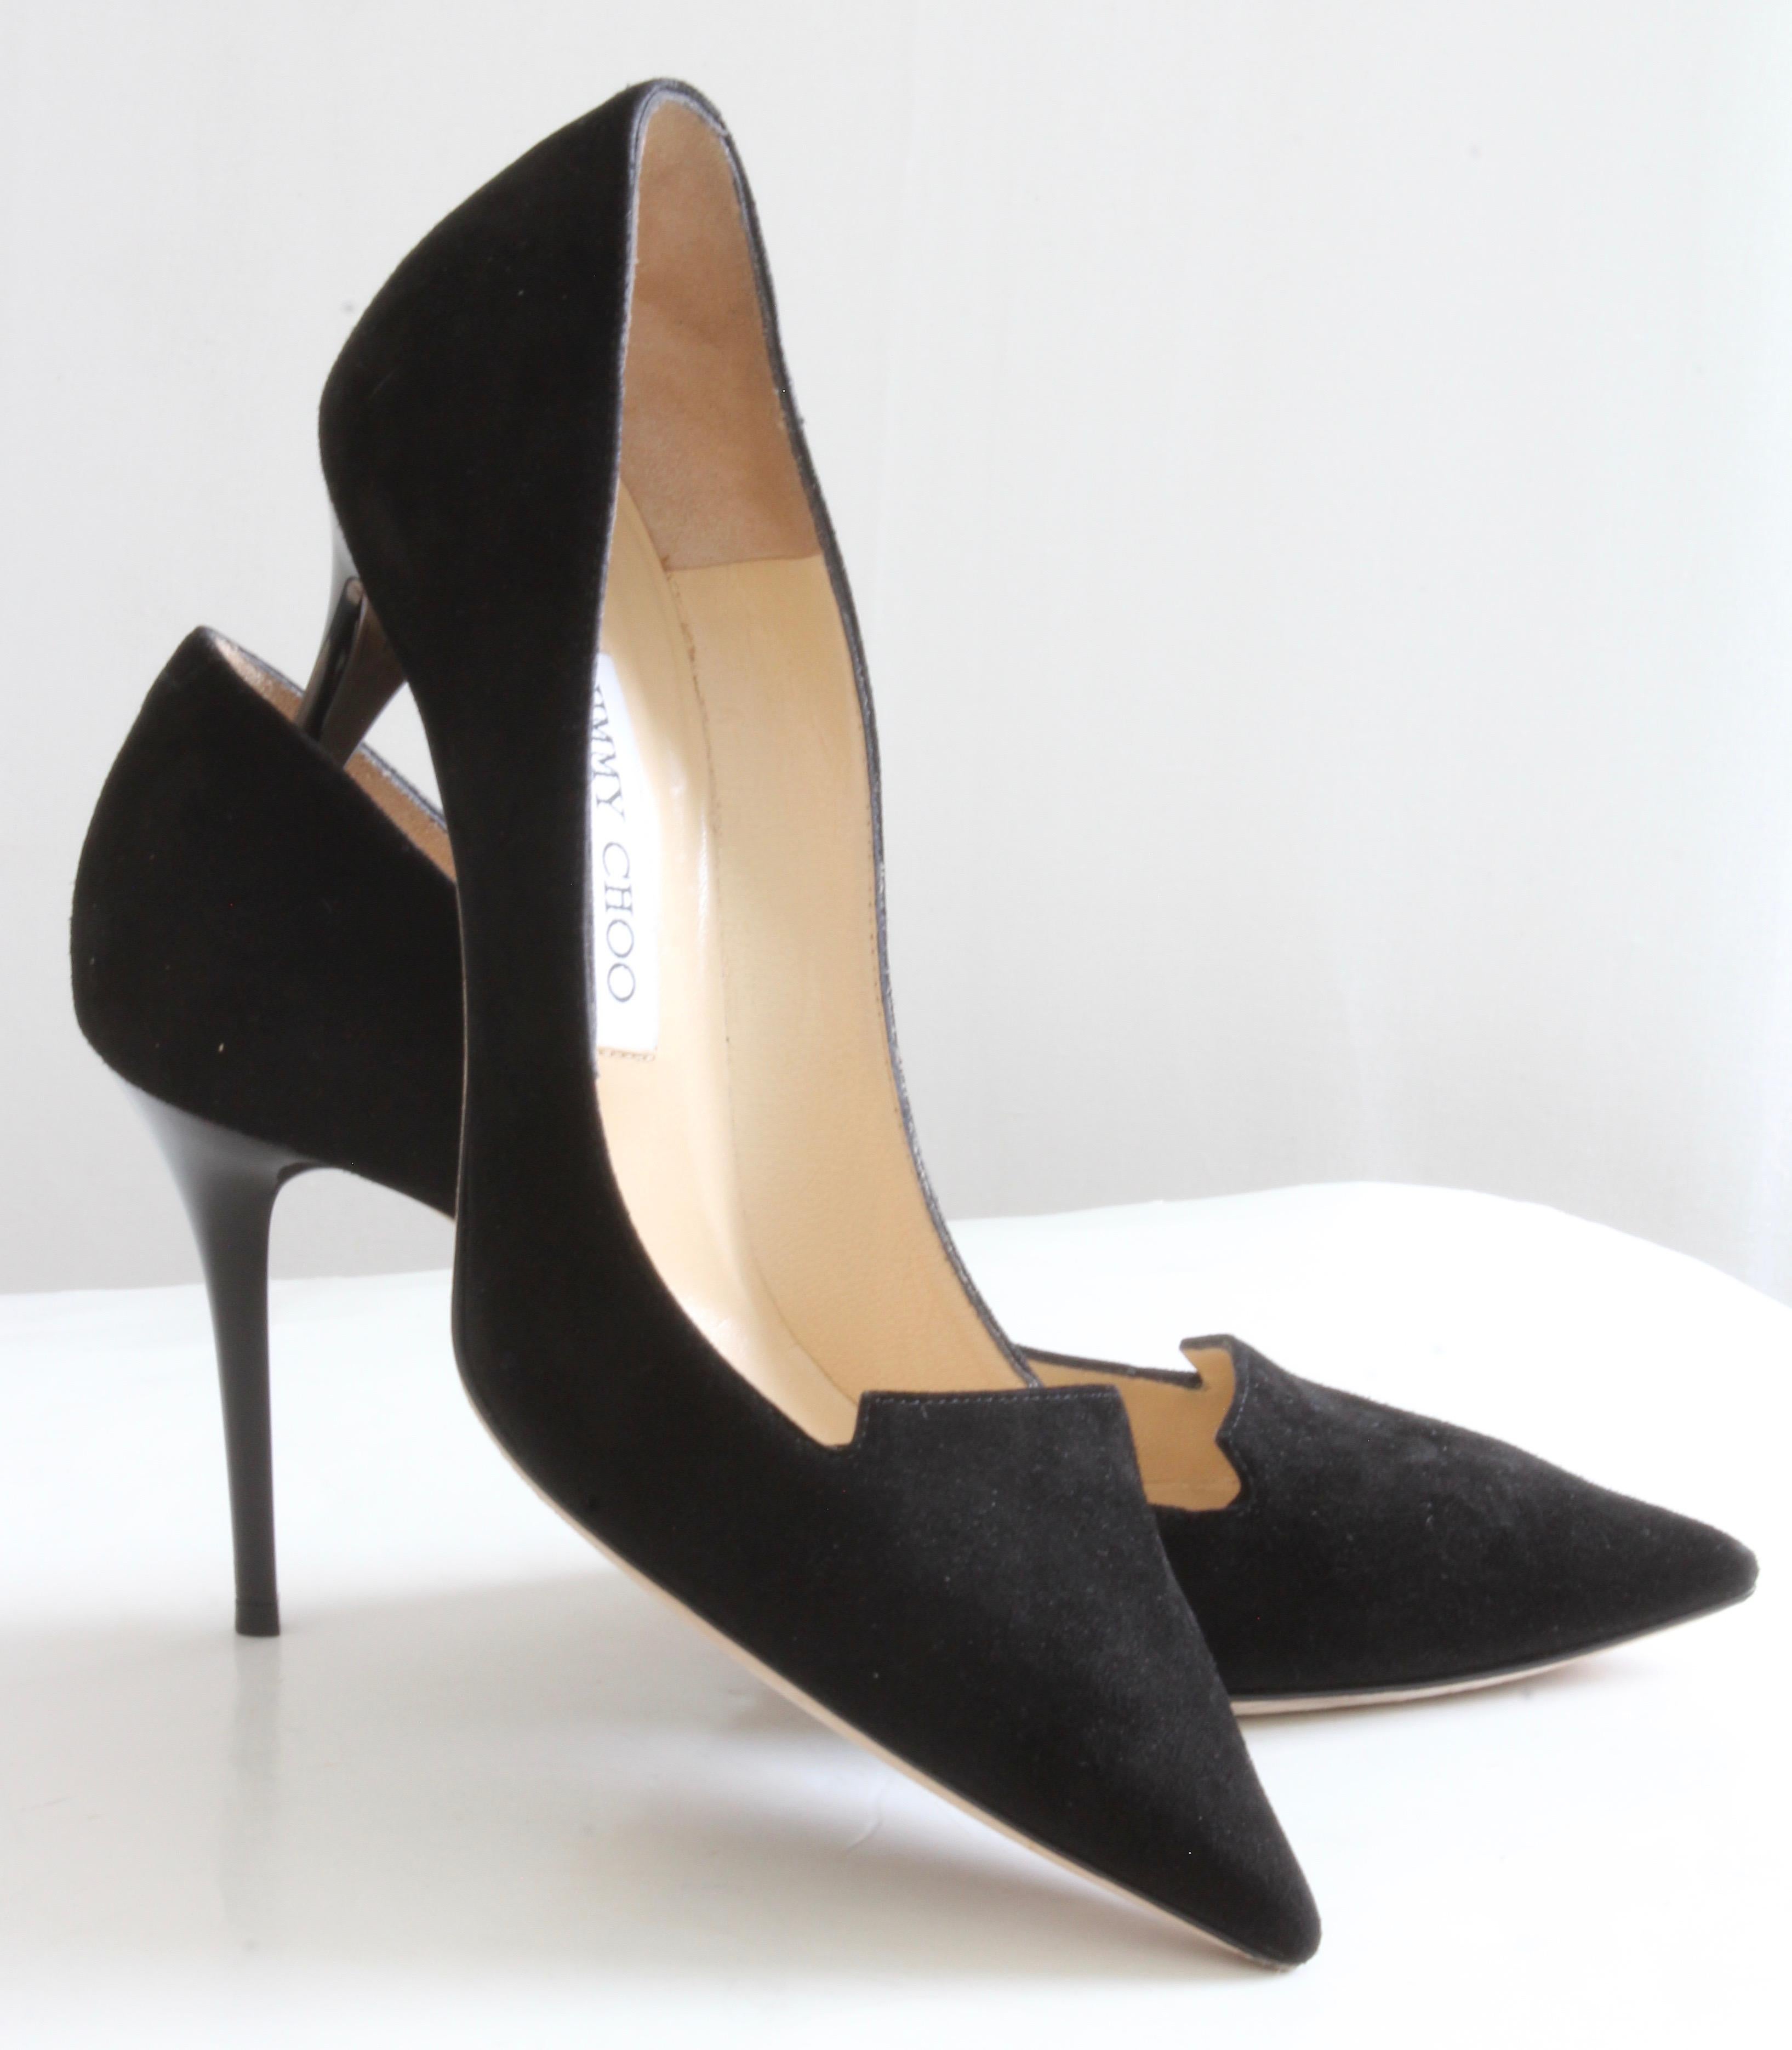 Here's a pair of chic black suede stiletto pumps from Jimmy Choo. From their 247 collection, this is the Alia in black suede, with a 3.5in heel.  Perfect for day or evening, these retailed for $625 + tax.  

Preowned with minimal signs of prior